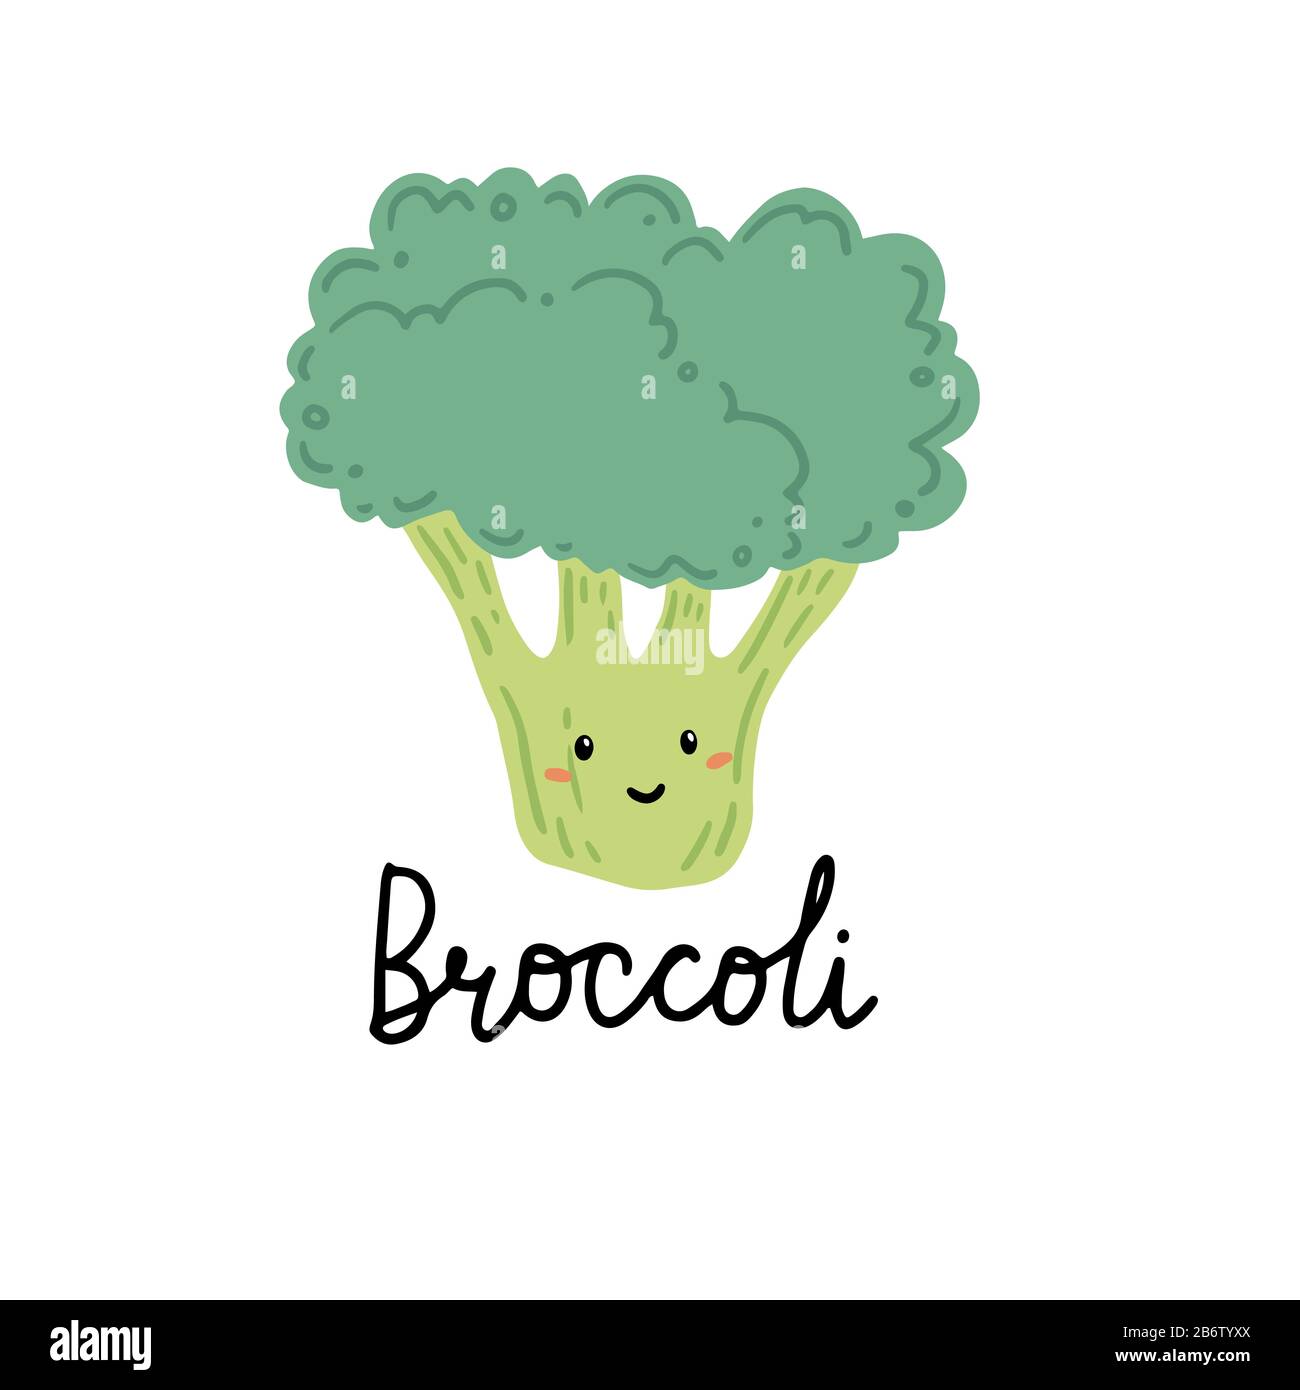 Broccoli funny cartoon character. Vector illustration isolated. Concept of healthy food, vegetarian. Broccoli have abstract, cartoon, hand drawn style. Stock Vector